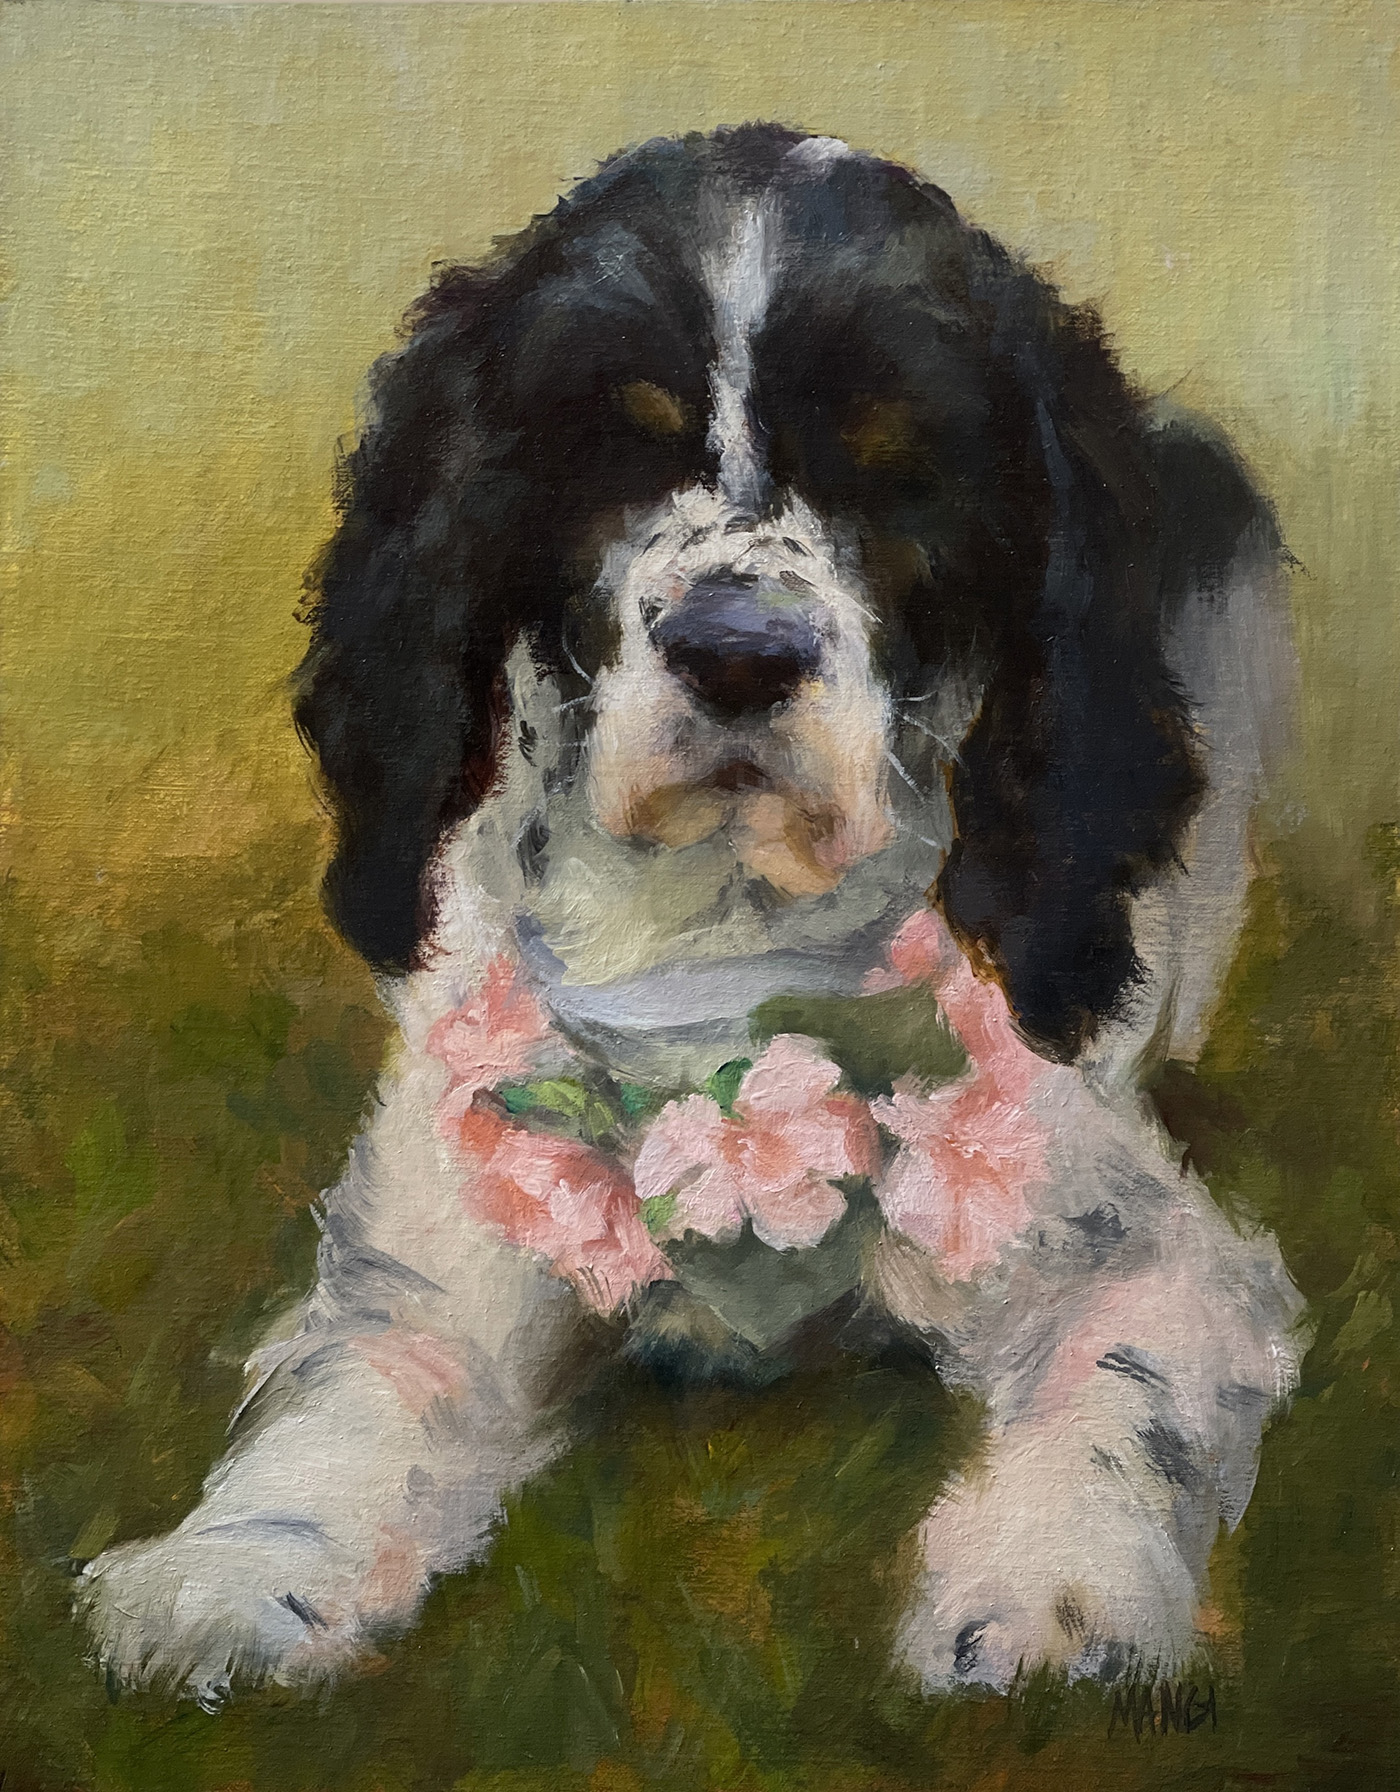 oil painting of blind dog sitting down, with flowers around its neck